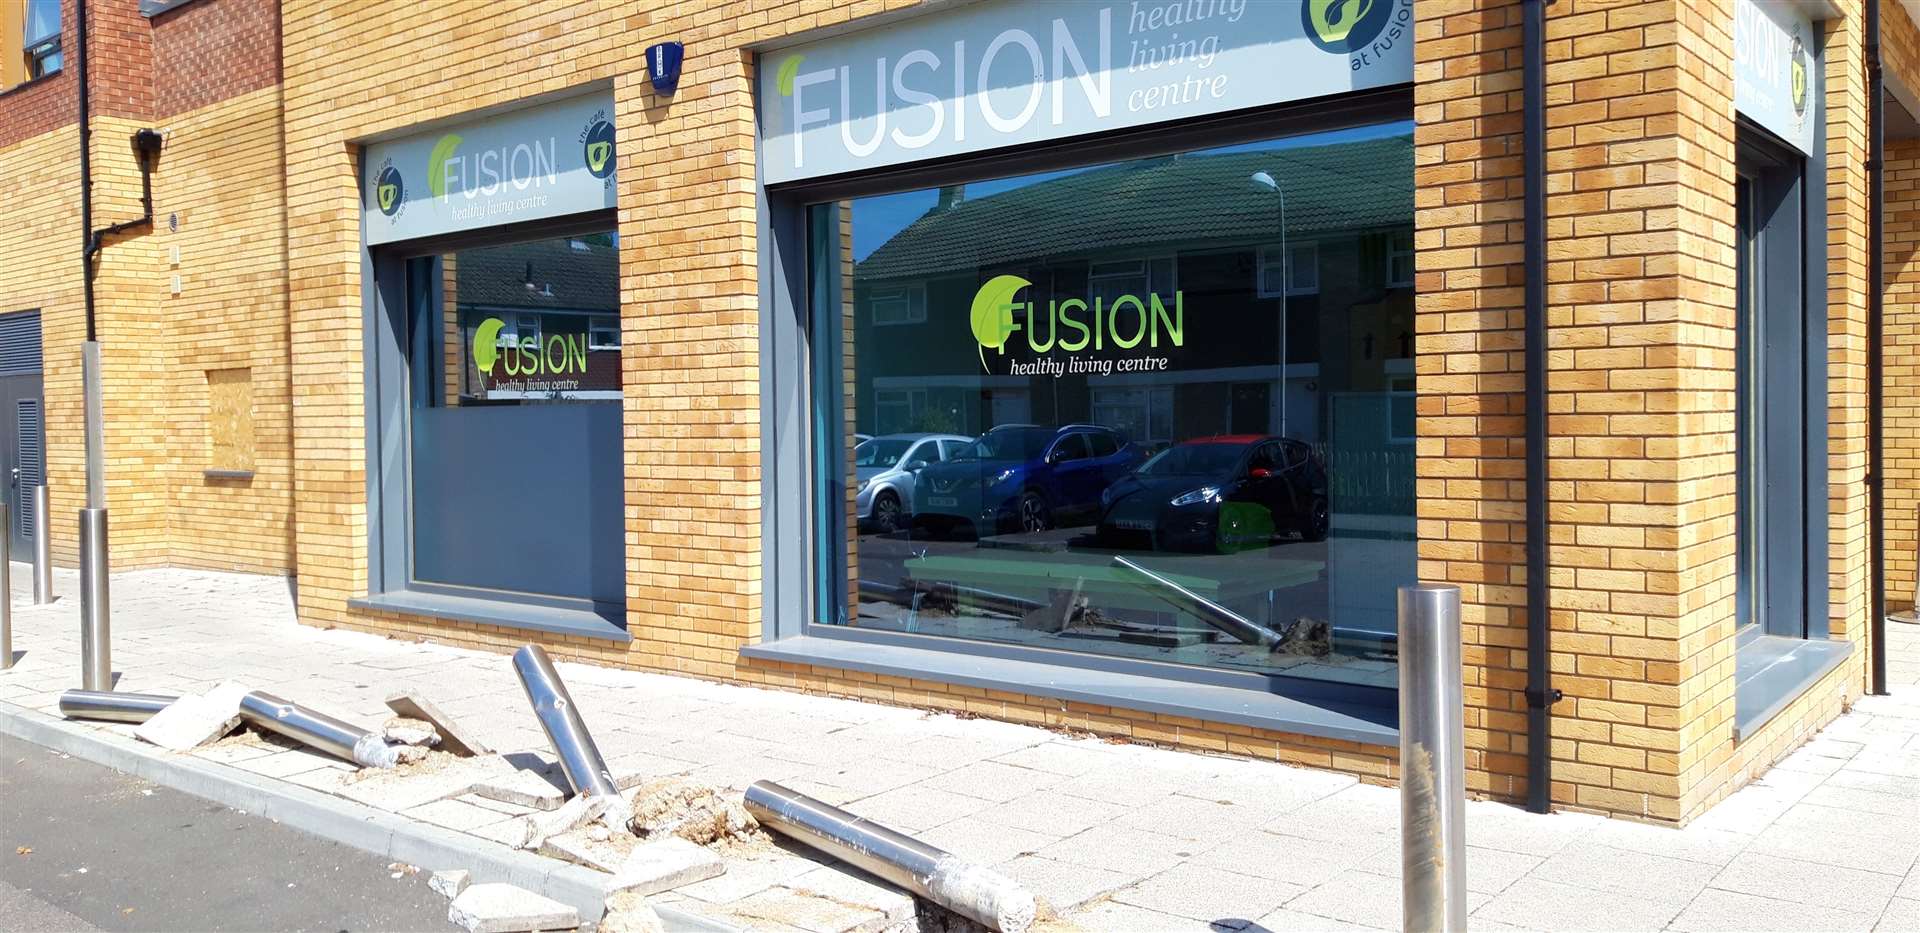 Bollards outside Fusion Healthy Living Centre were damaged during the night (14244218)